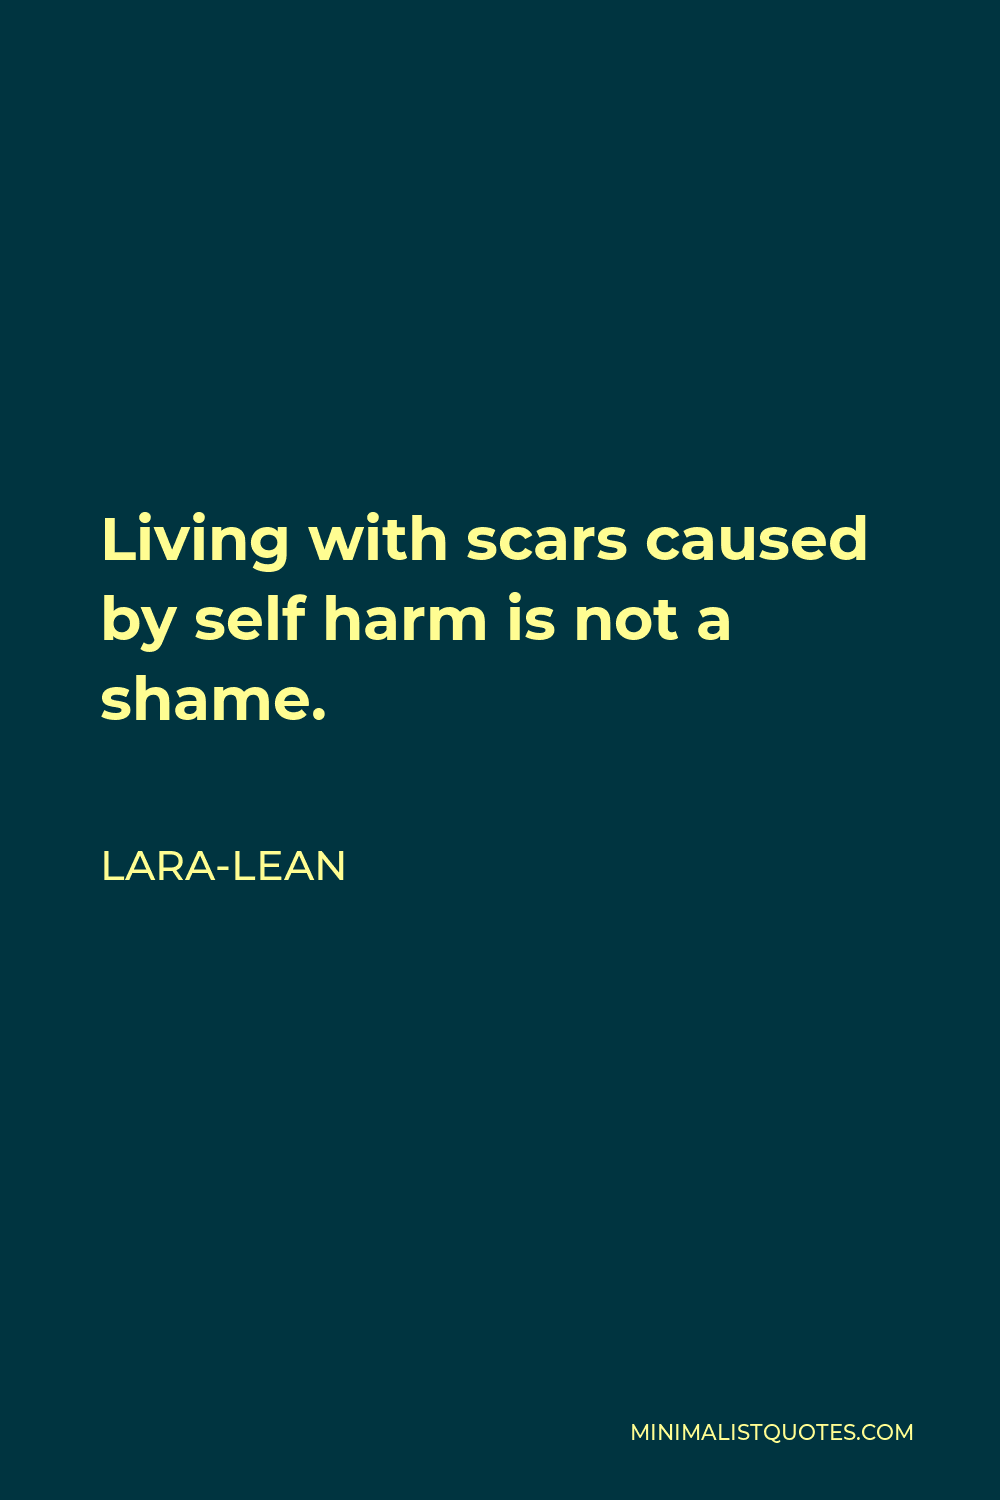 Lara-Lean Quote - Living with scars caused by self harm is not a shame.